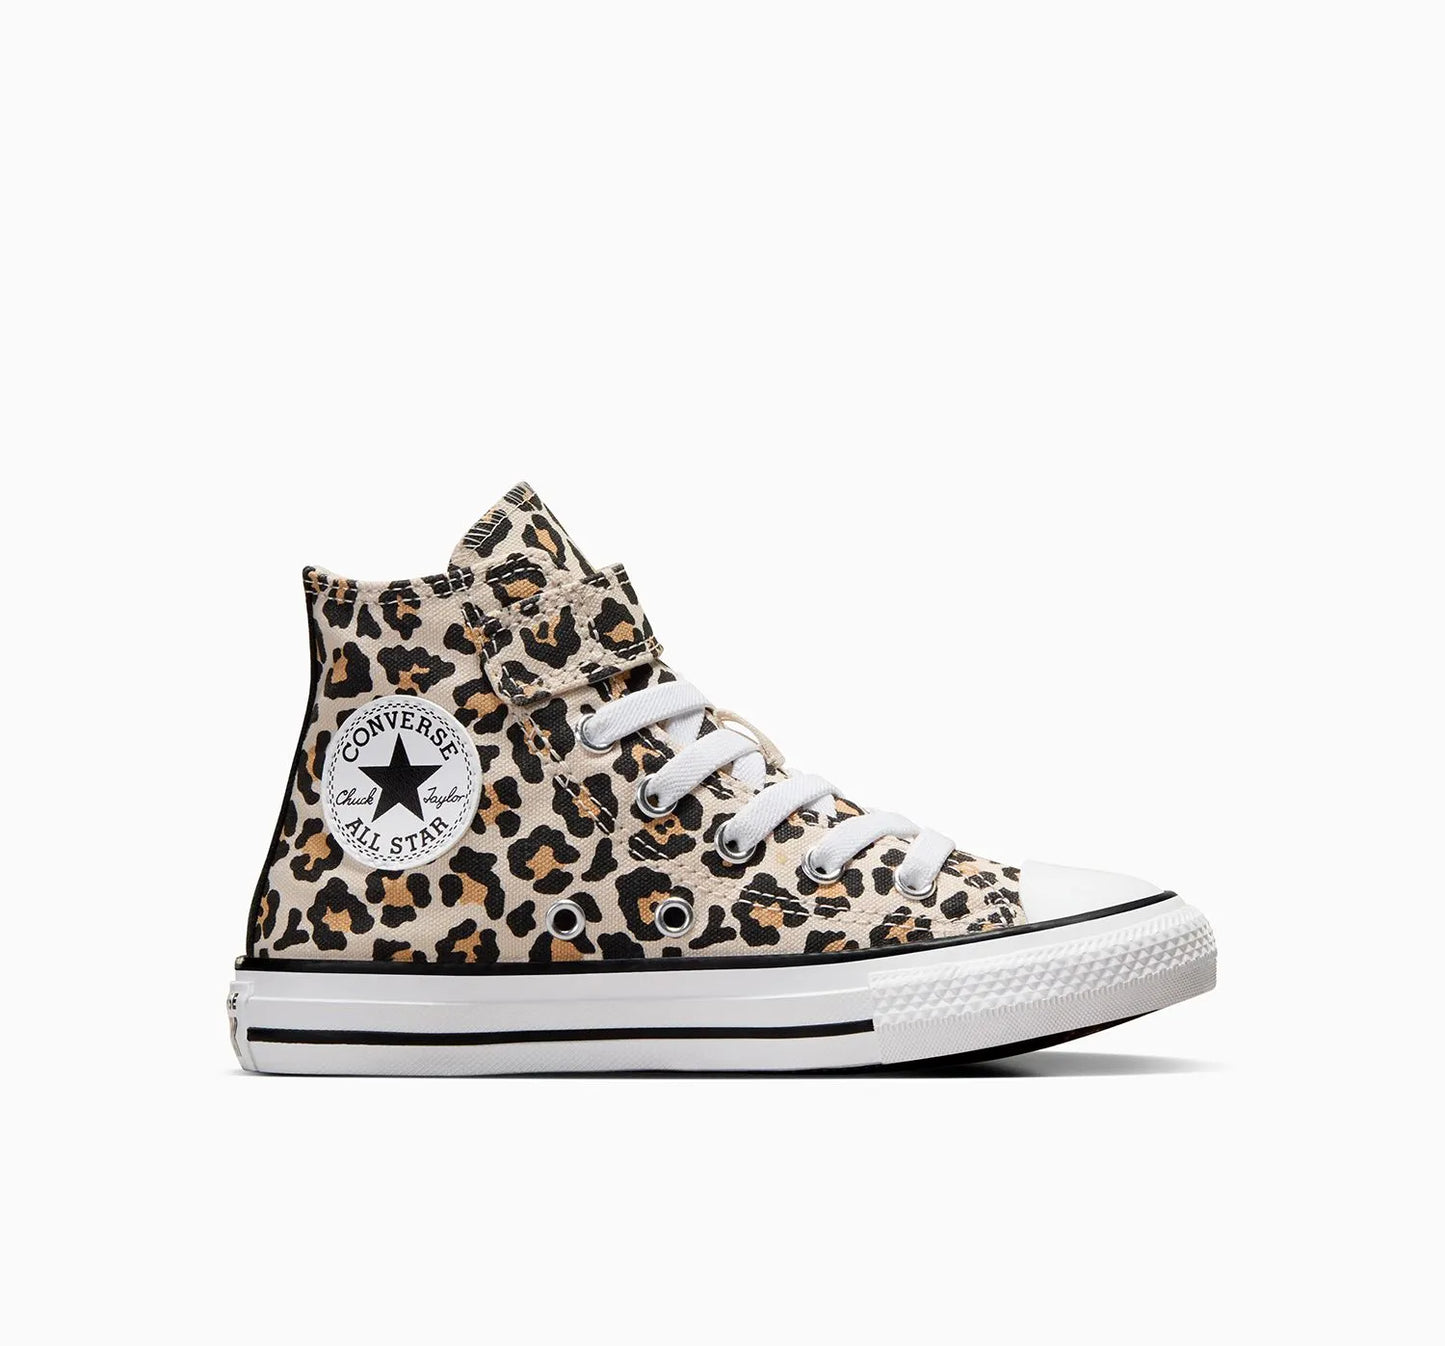 CONVERSE Chuck Taylor All Star Leopard Love 1V Youth Hi Shoe - Driftwood/Black/White